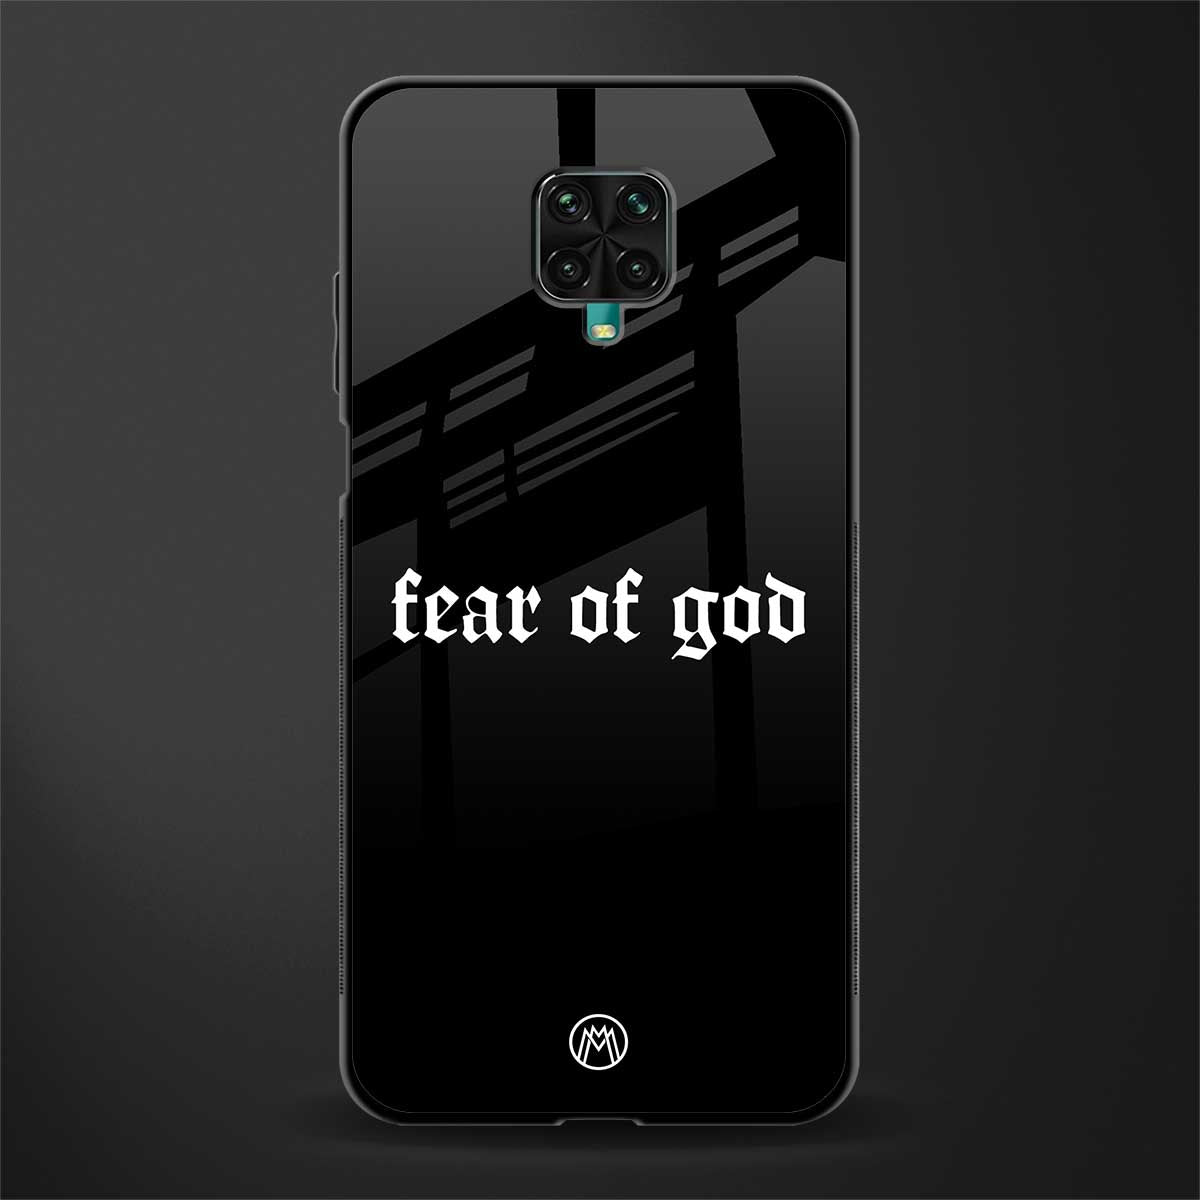 fear of god phone cover for redmi note 9 pro